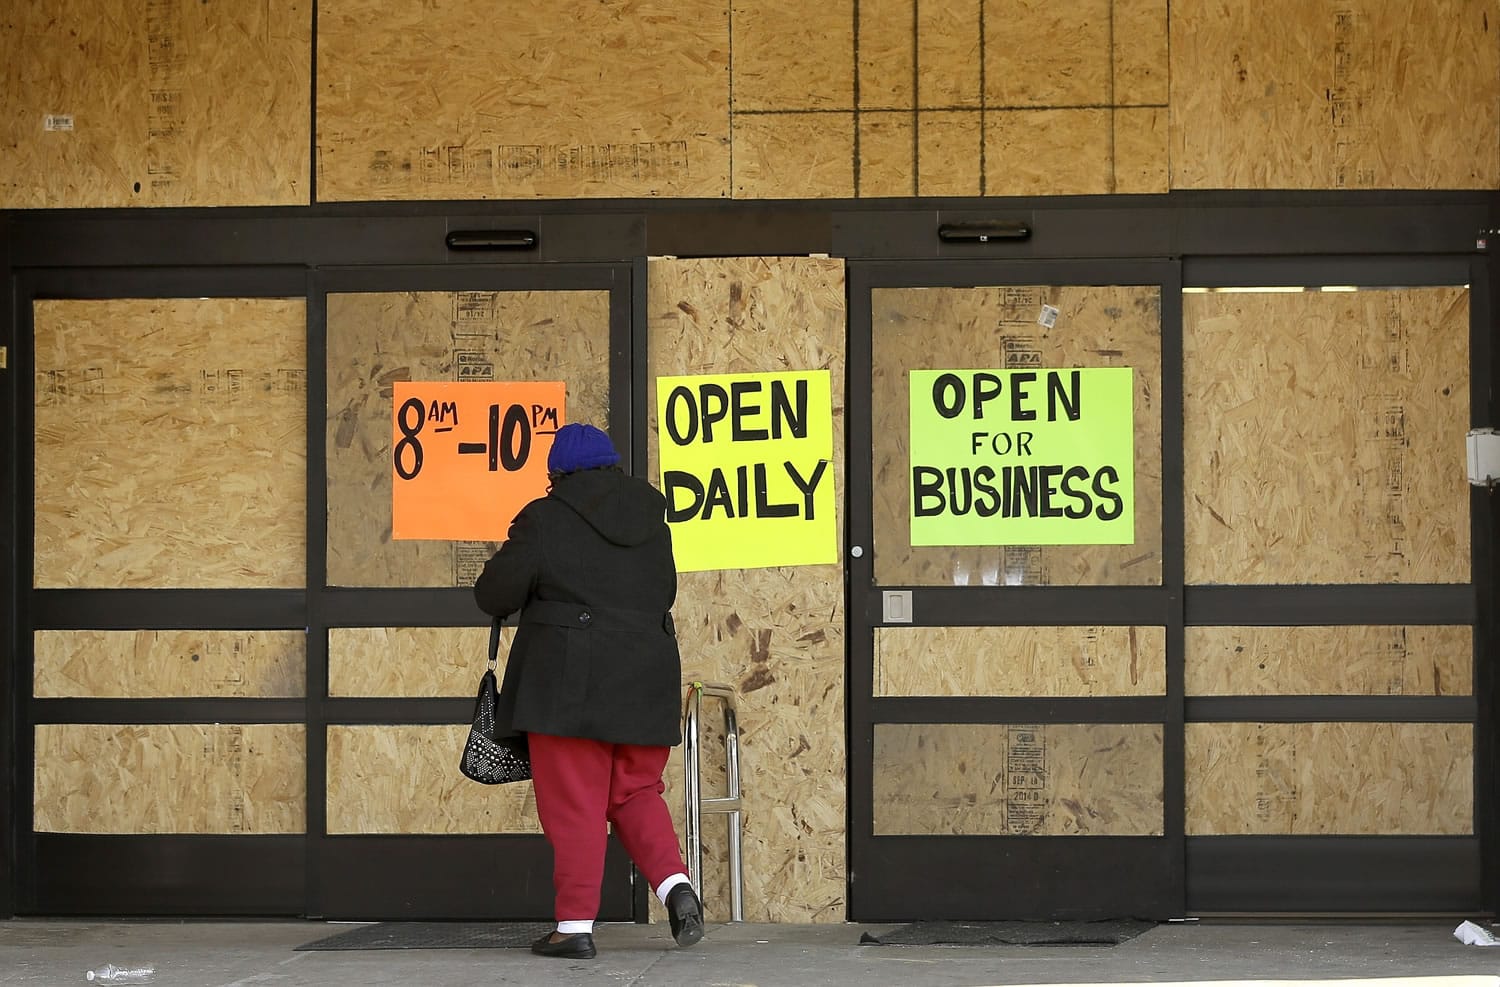 A woman walks into an open but boarded up business Thursday, Nov. 20, 2014, in Ferguson, Mo. Ferguson and the St. Louis region are on edge in anticipation of the announcement by a grand jury whether to criminally charge Officer Darren Wilson in the killing of 18-year-old Michael Brown.